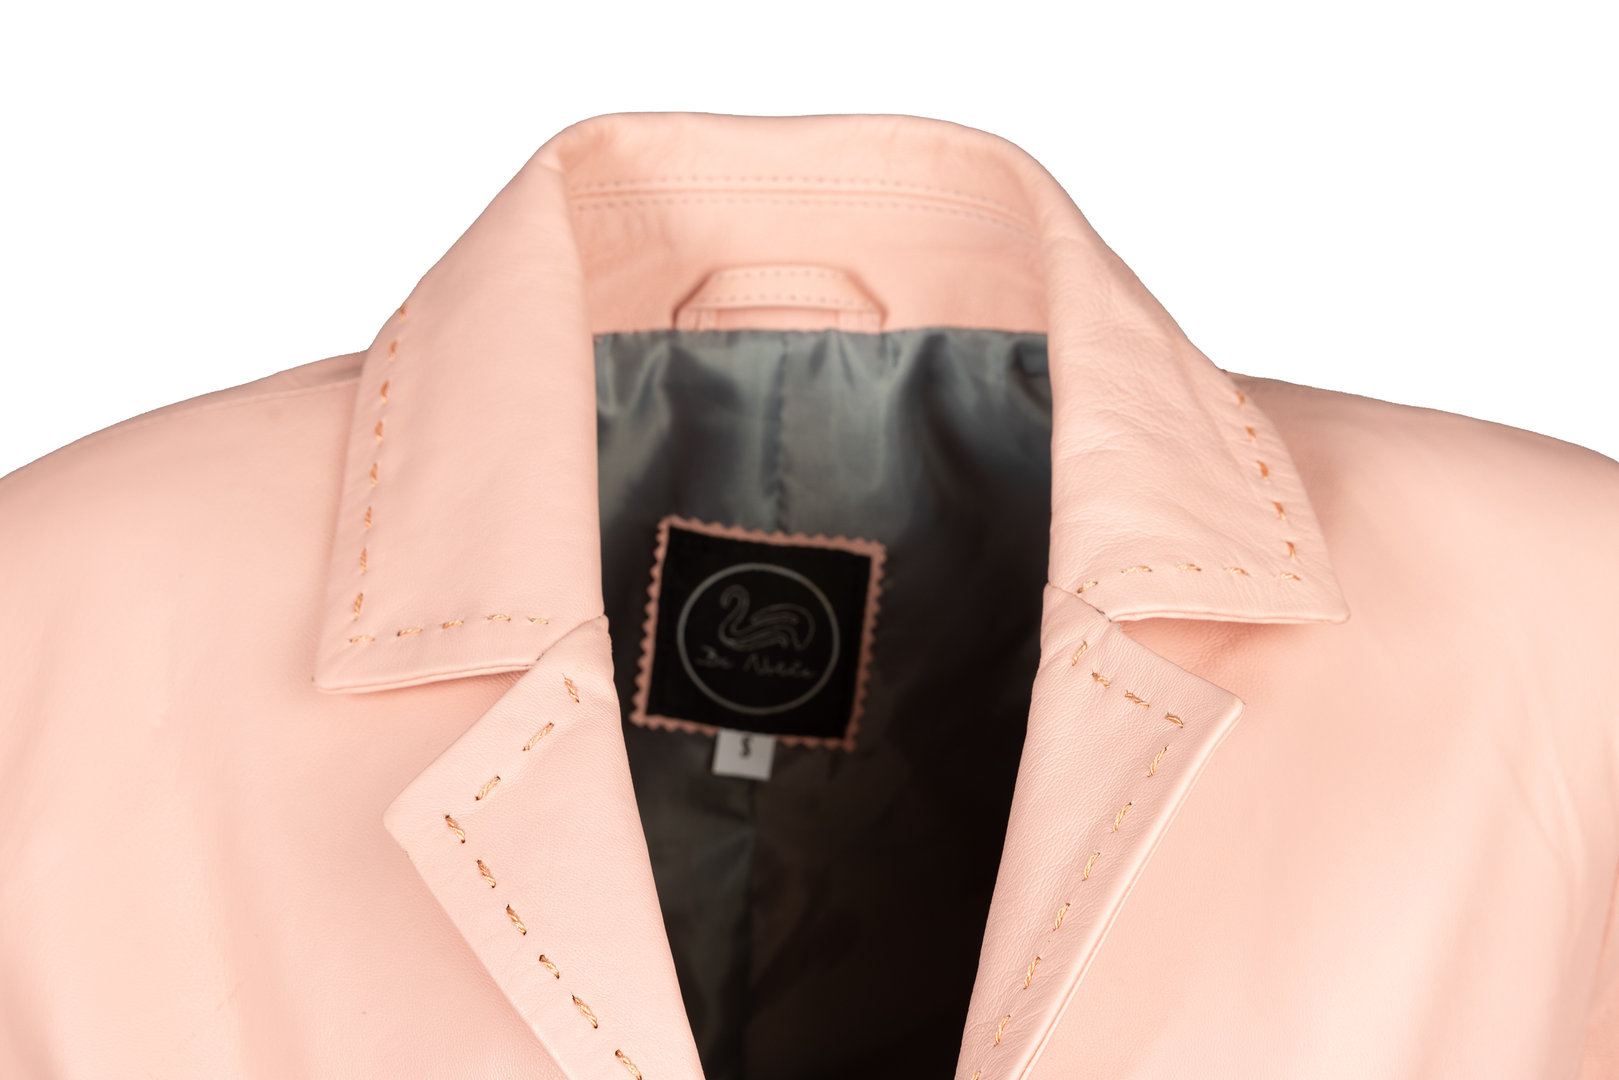 Leather Blazer in BE NOBLE Business Style pink